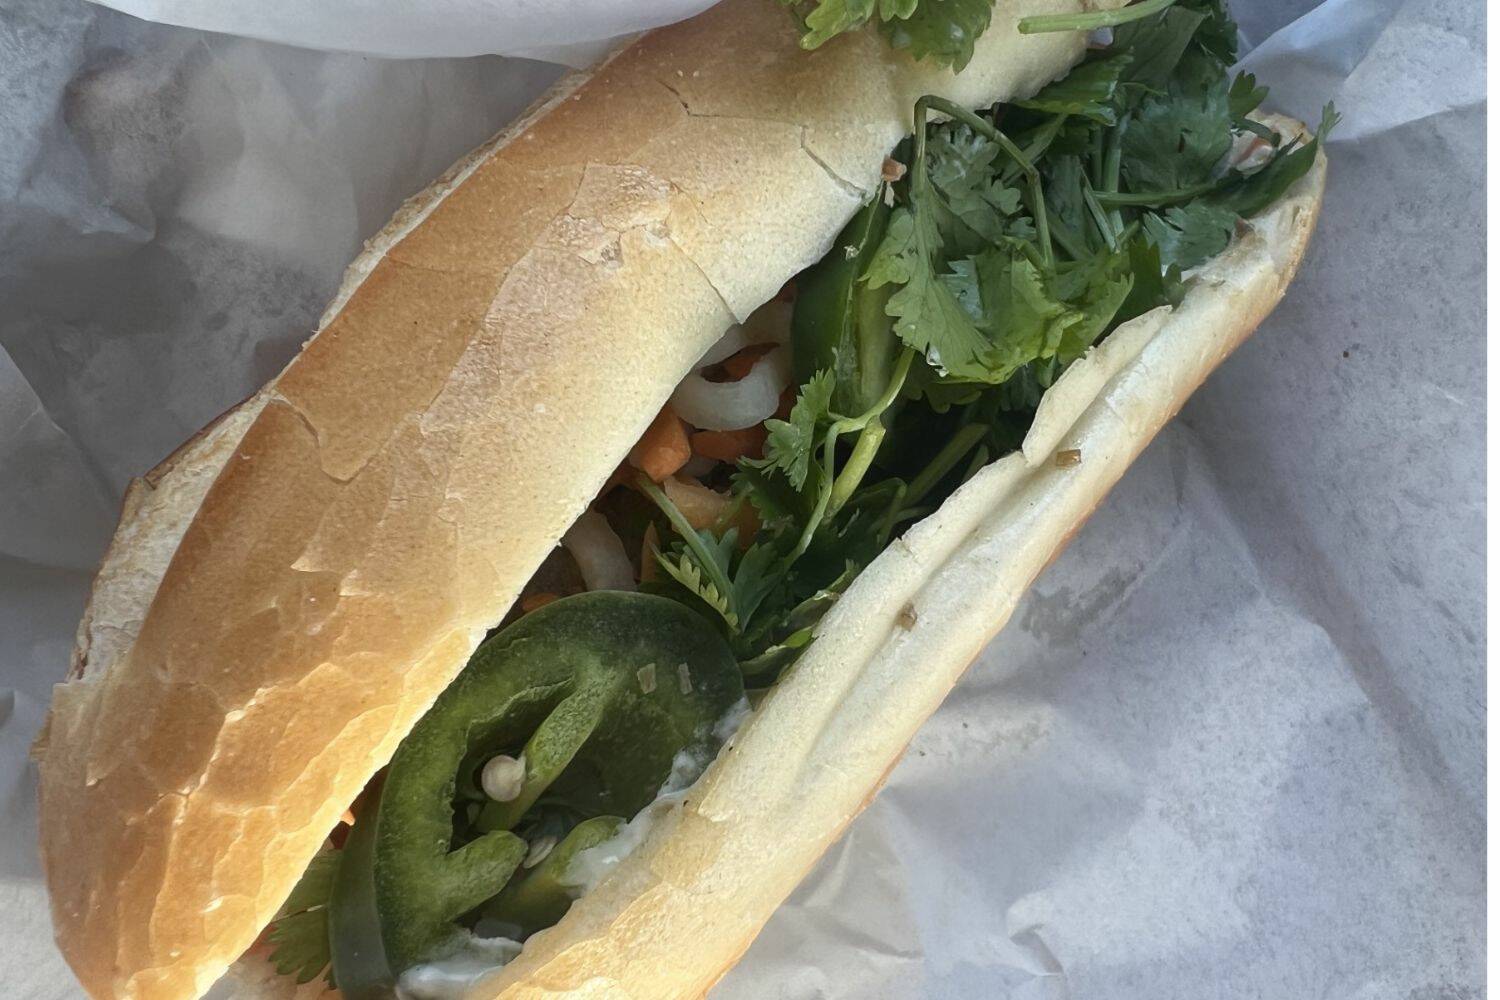 Renton Deli’s banh mi is the real deal. (Cameron Sheppard/Sound Publishing)